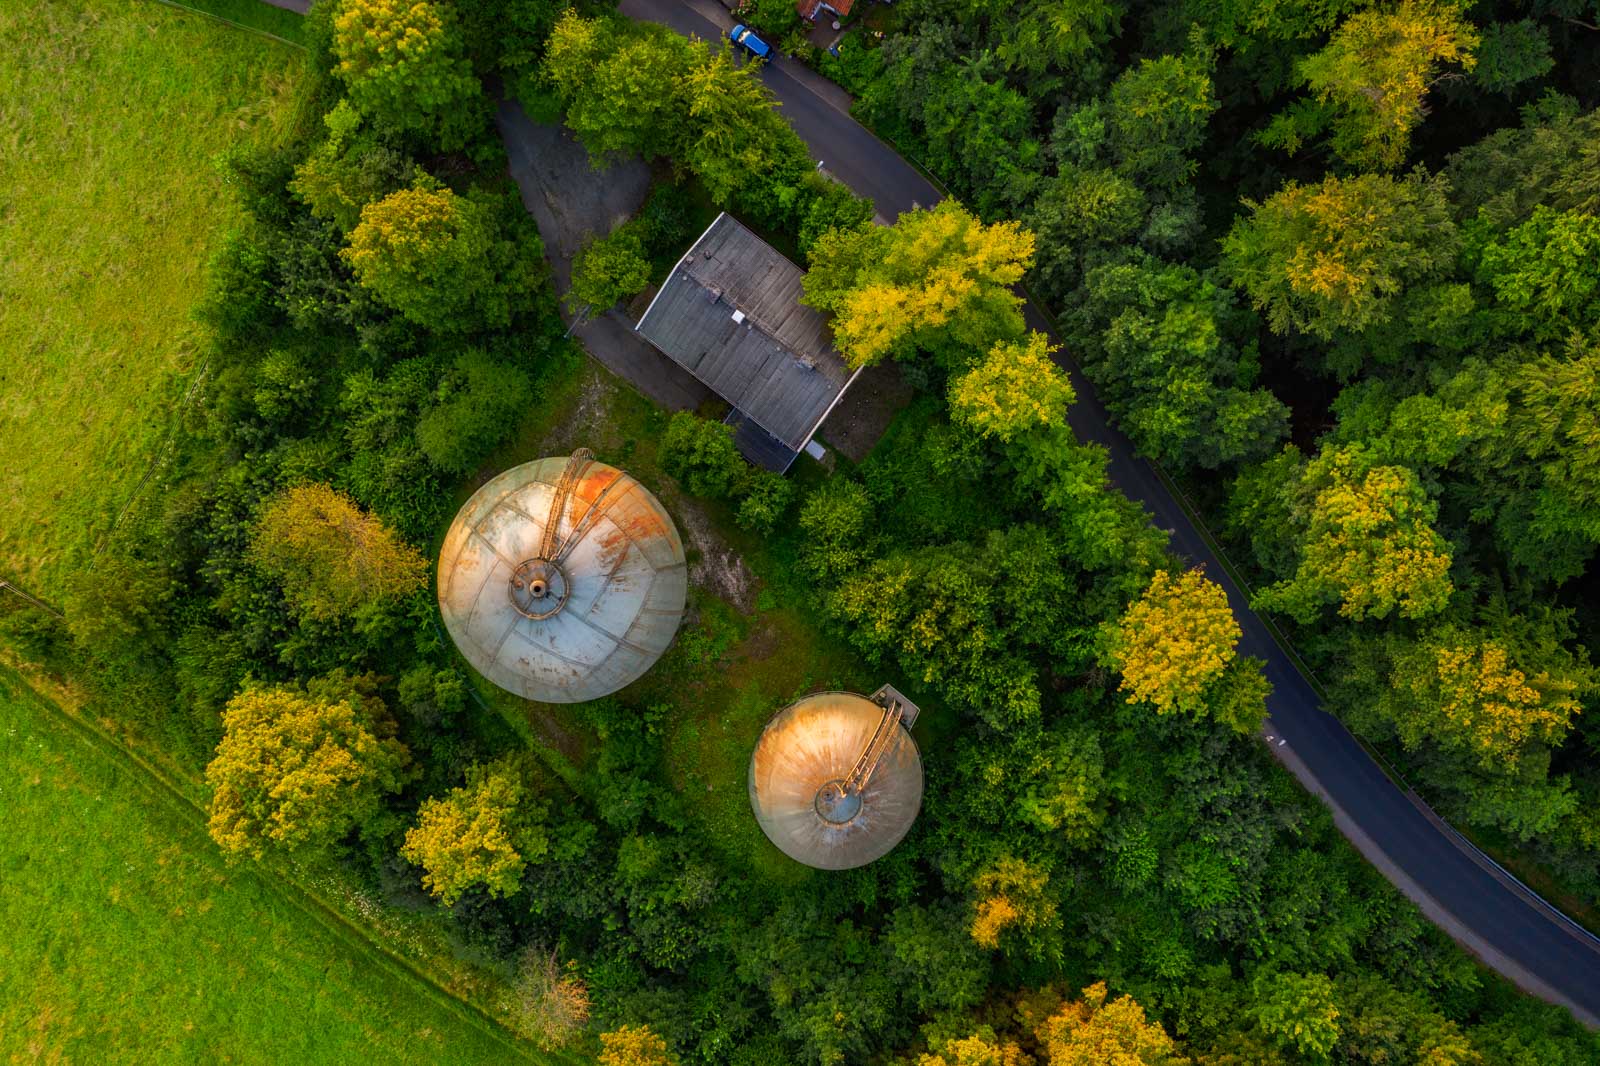 Sunrise above the old gasometers in the Teutoburg Forest (Bielefeld-Bethel, Germany).